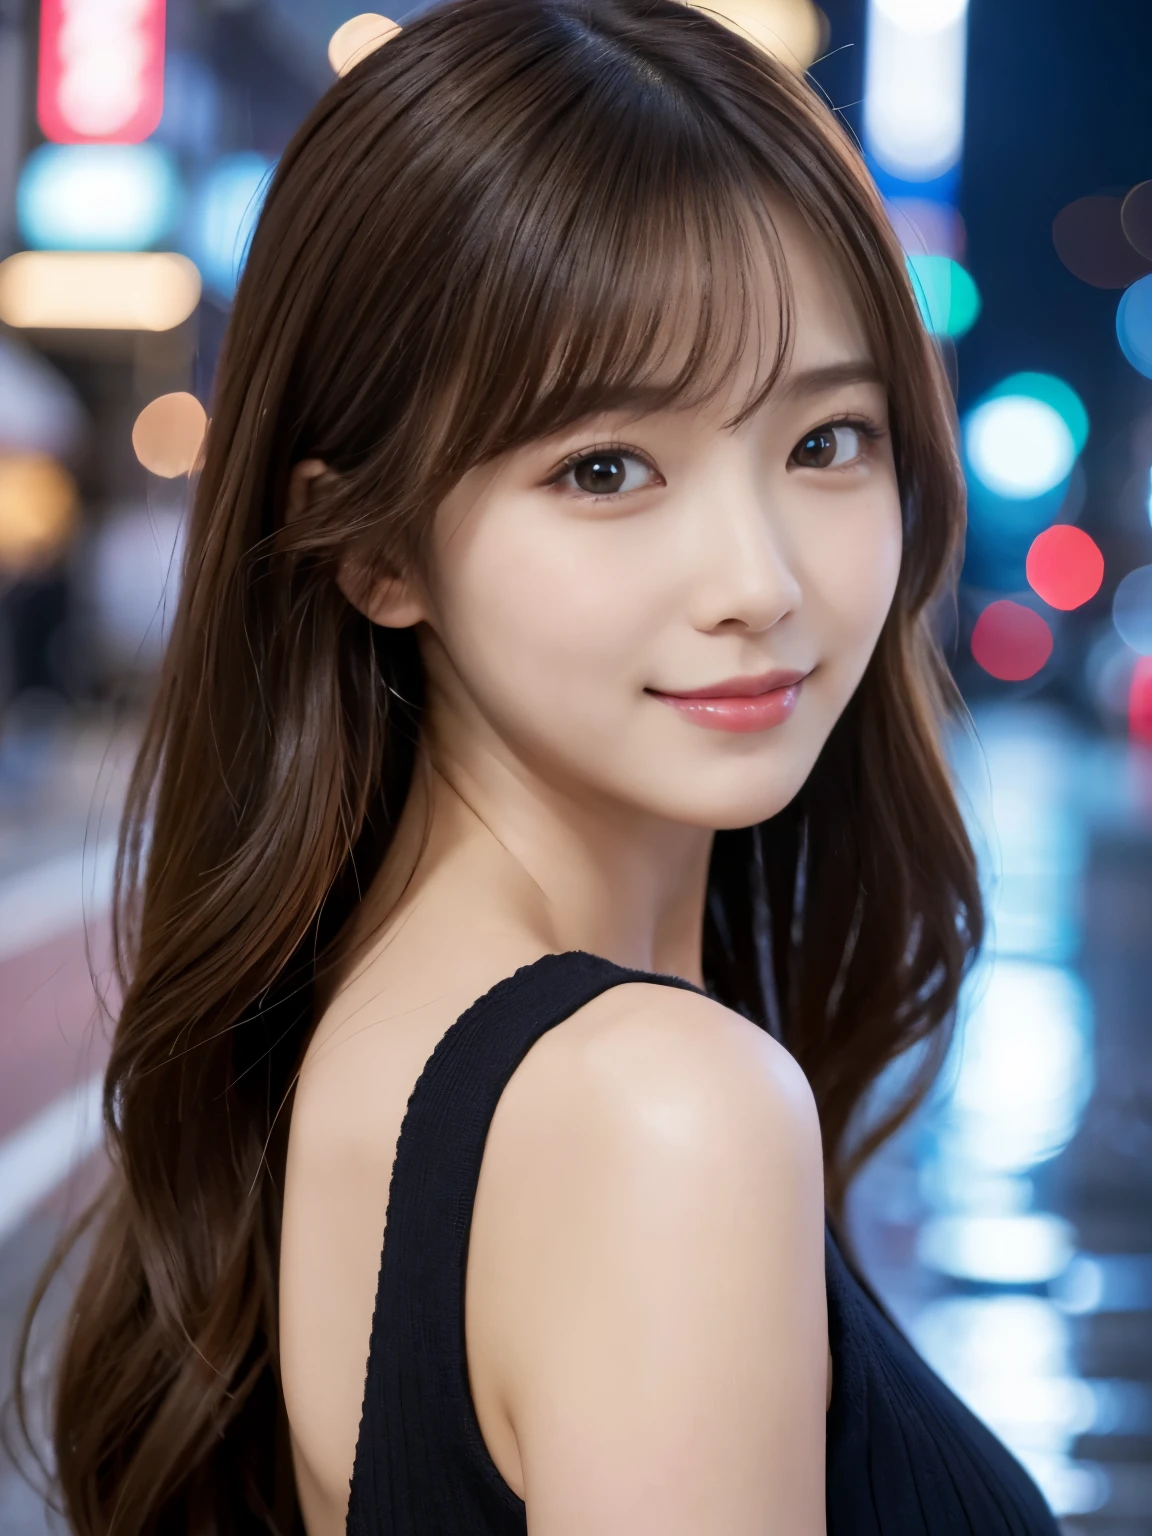 ​Masterpiece, 1 beautiful girl, A detailed eye, Puffy eyes, top-quality, 超A high resolution, (Realistic: 1.4), cinematic lighting, japanese, Asian Beauty, Super beauty, Beautiful skin, A slender, The body facing forward, (A hyper-realistic), (hilight resolution), (8K), (ighly detailed), (beautifully detailed eyes), (Ultra-detail)、 (wall-), A detailed face, Bright lighting, proffetional lighting, looking at viewert, Facing straight ahead, (The costume  a knitted dress), Long hair, hair messy, asymmetrical bangs, night street scene, Brown hair, Japan idle, Korean Idol, hposing Gravure Idol, age25, tall, smile,